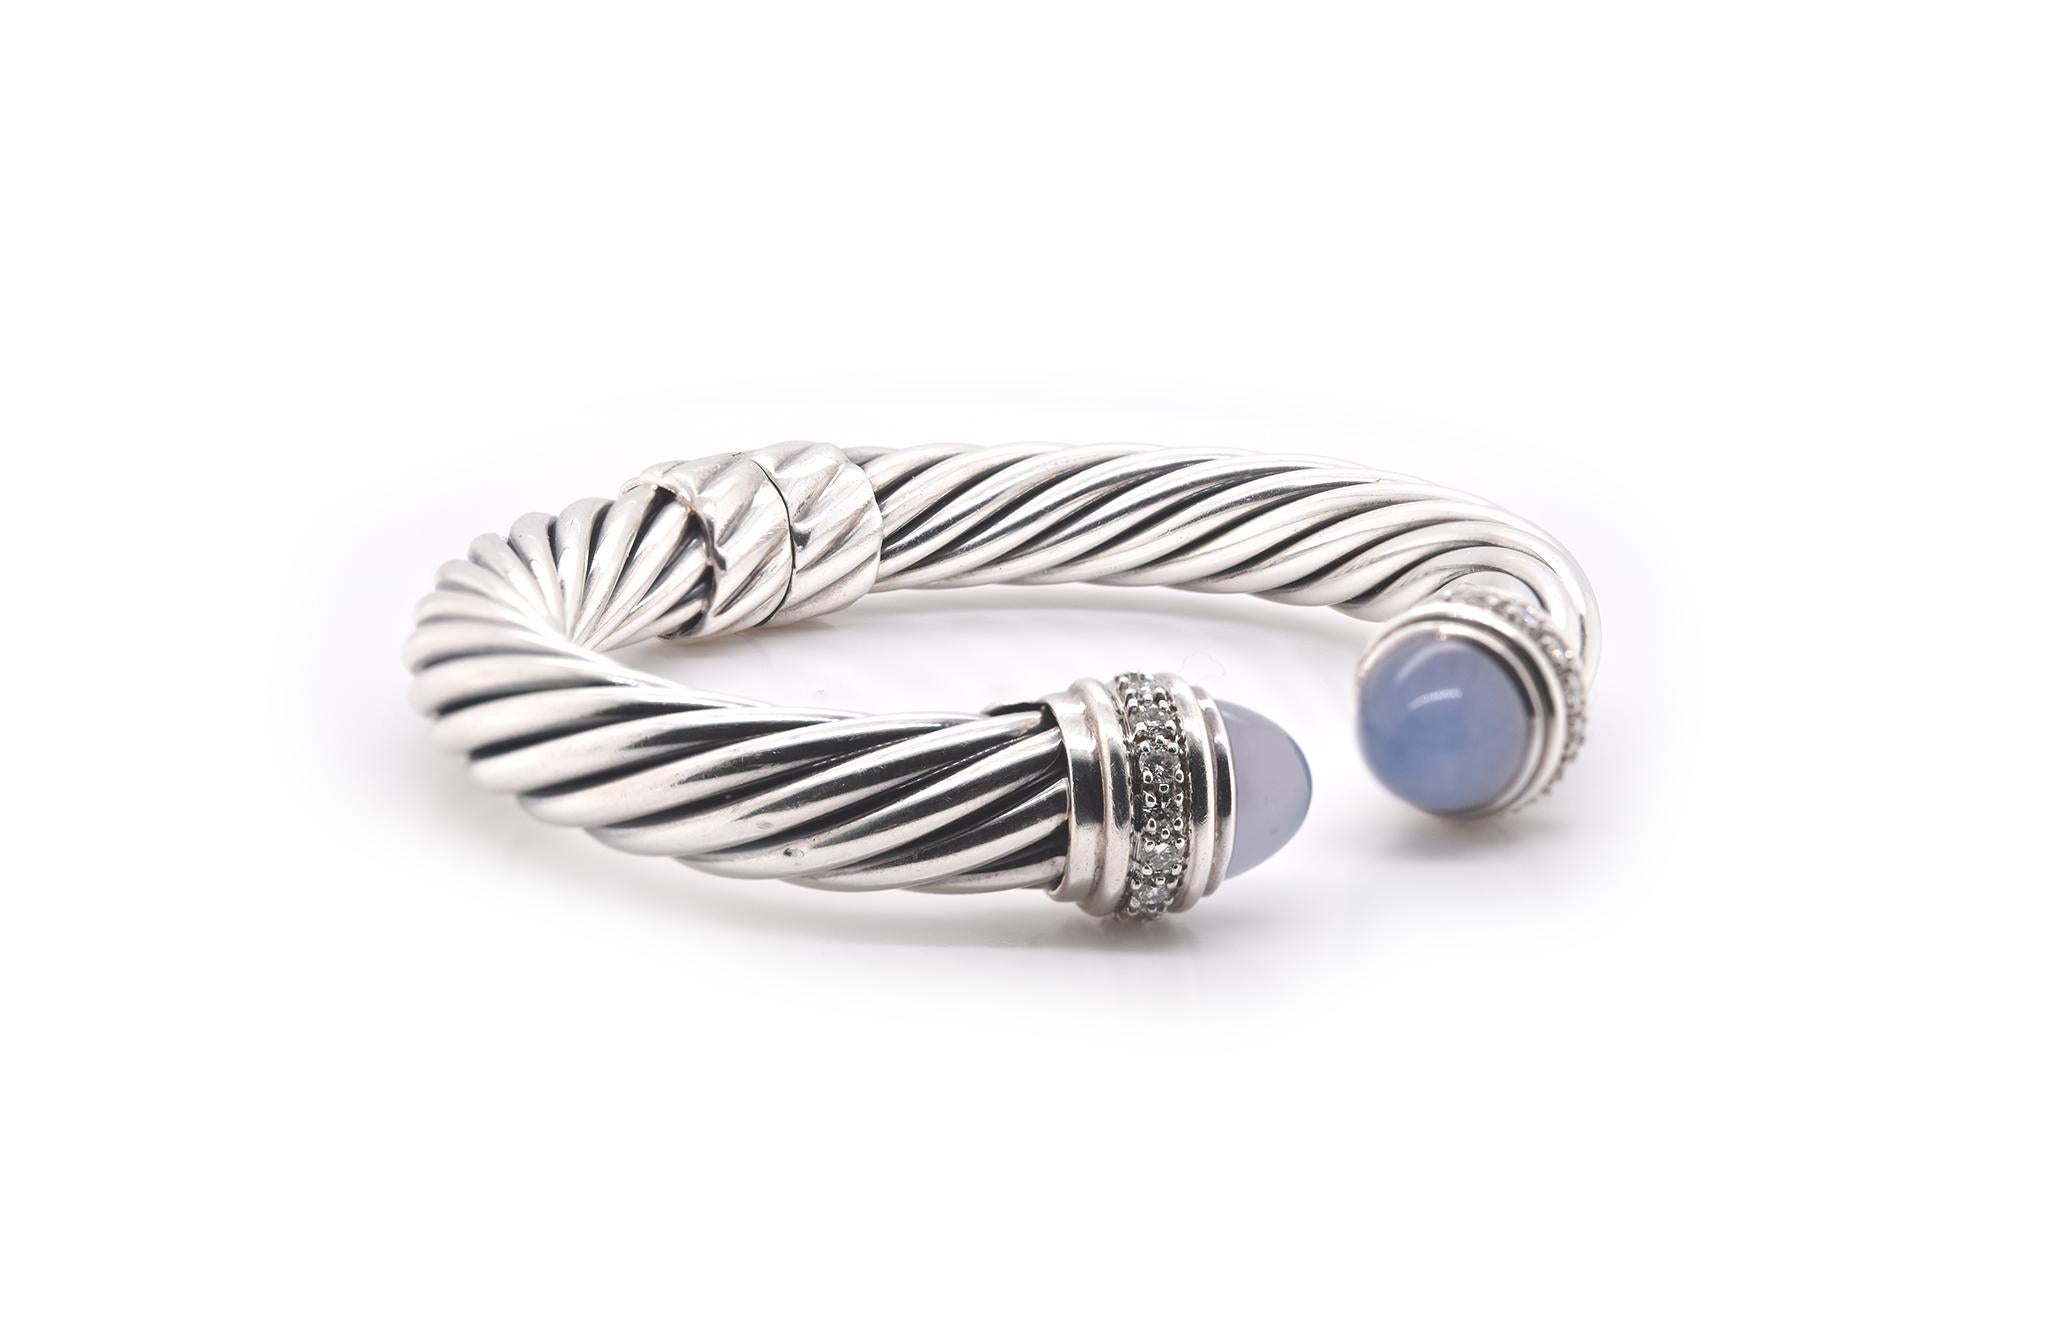 Designer: David Yurman 
Material: Sterling silver
Gemstone: 2 cabochon cut chalcedony 
Diamonds: 14 round brilliant cuts = 0.42cttw
Dimensions: bracelet measures 6.5” in length and 9.67mm in width
Weight: 41.92 grams
